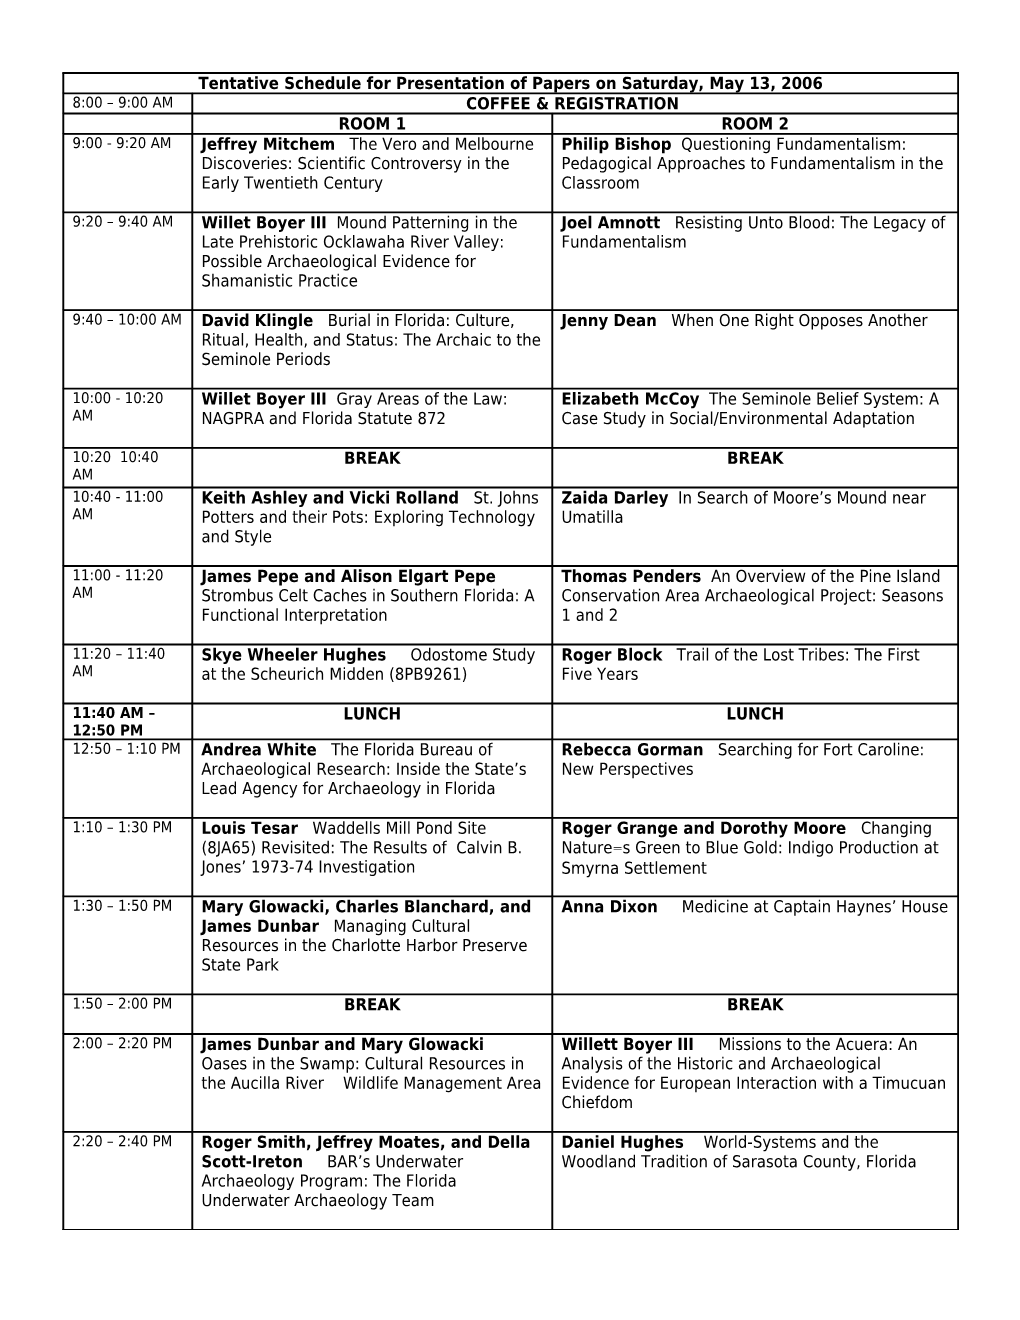 Presentation of Papers on Saturday, May 13, 2006